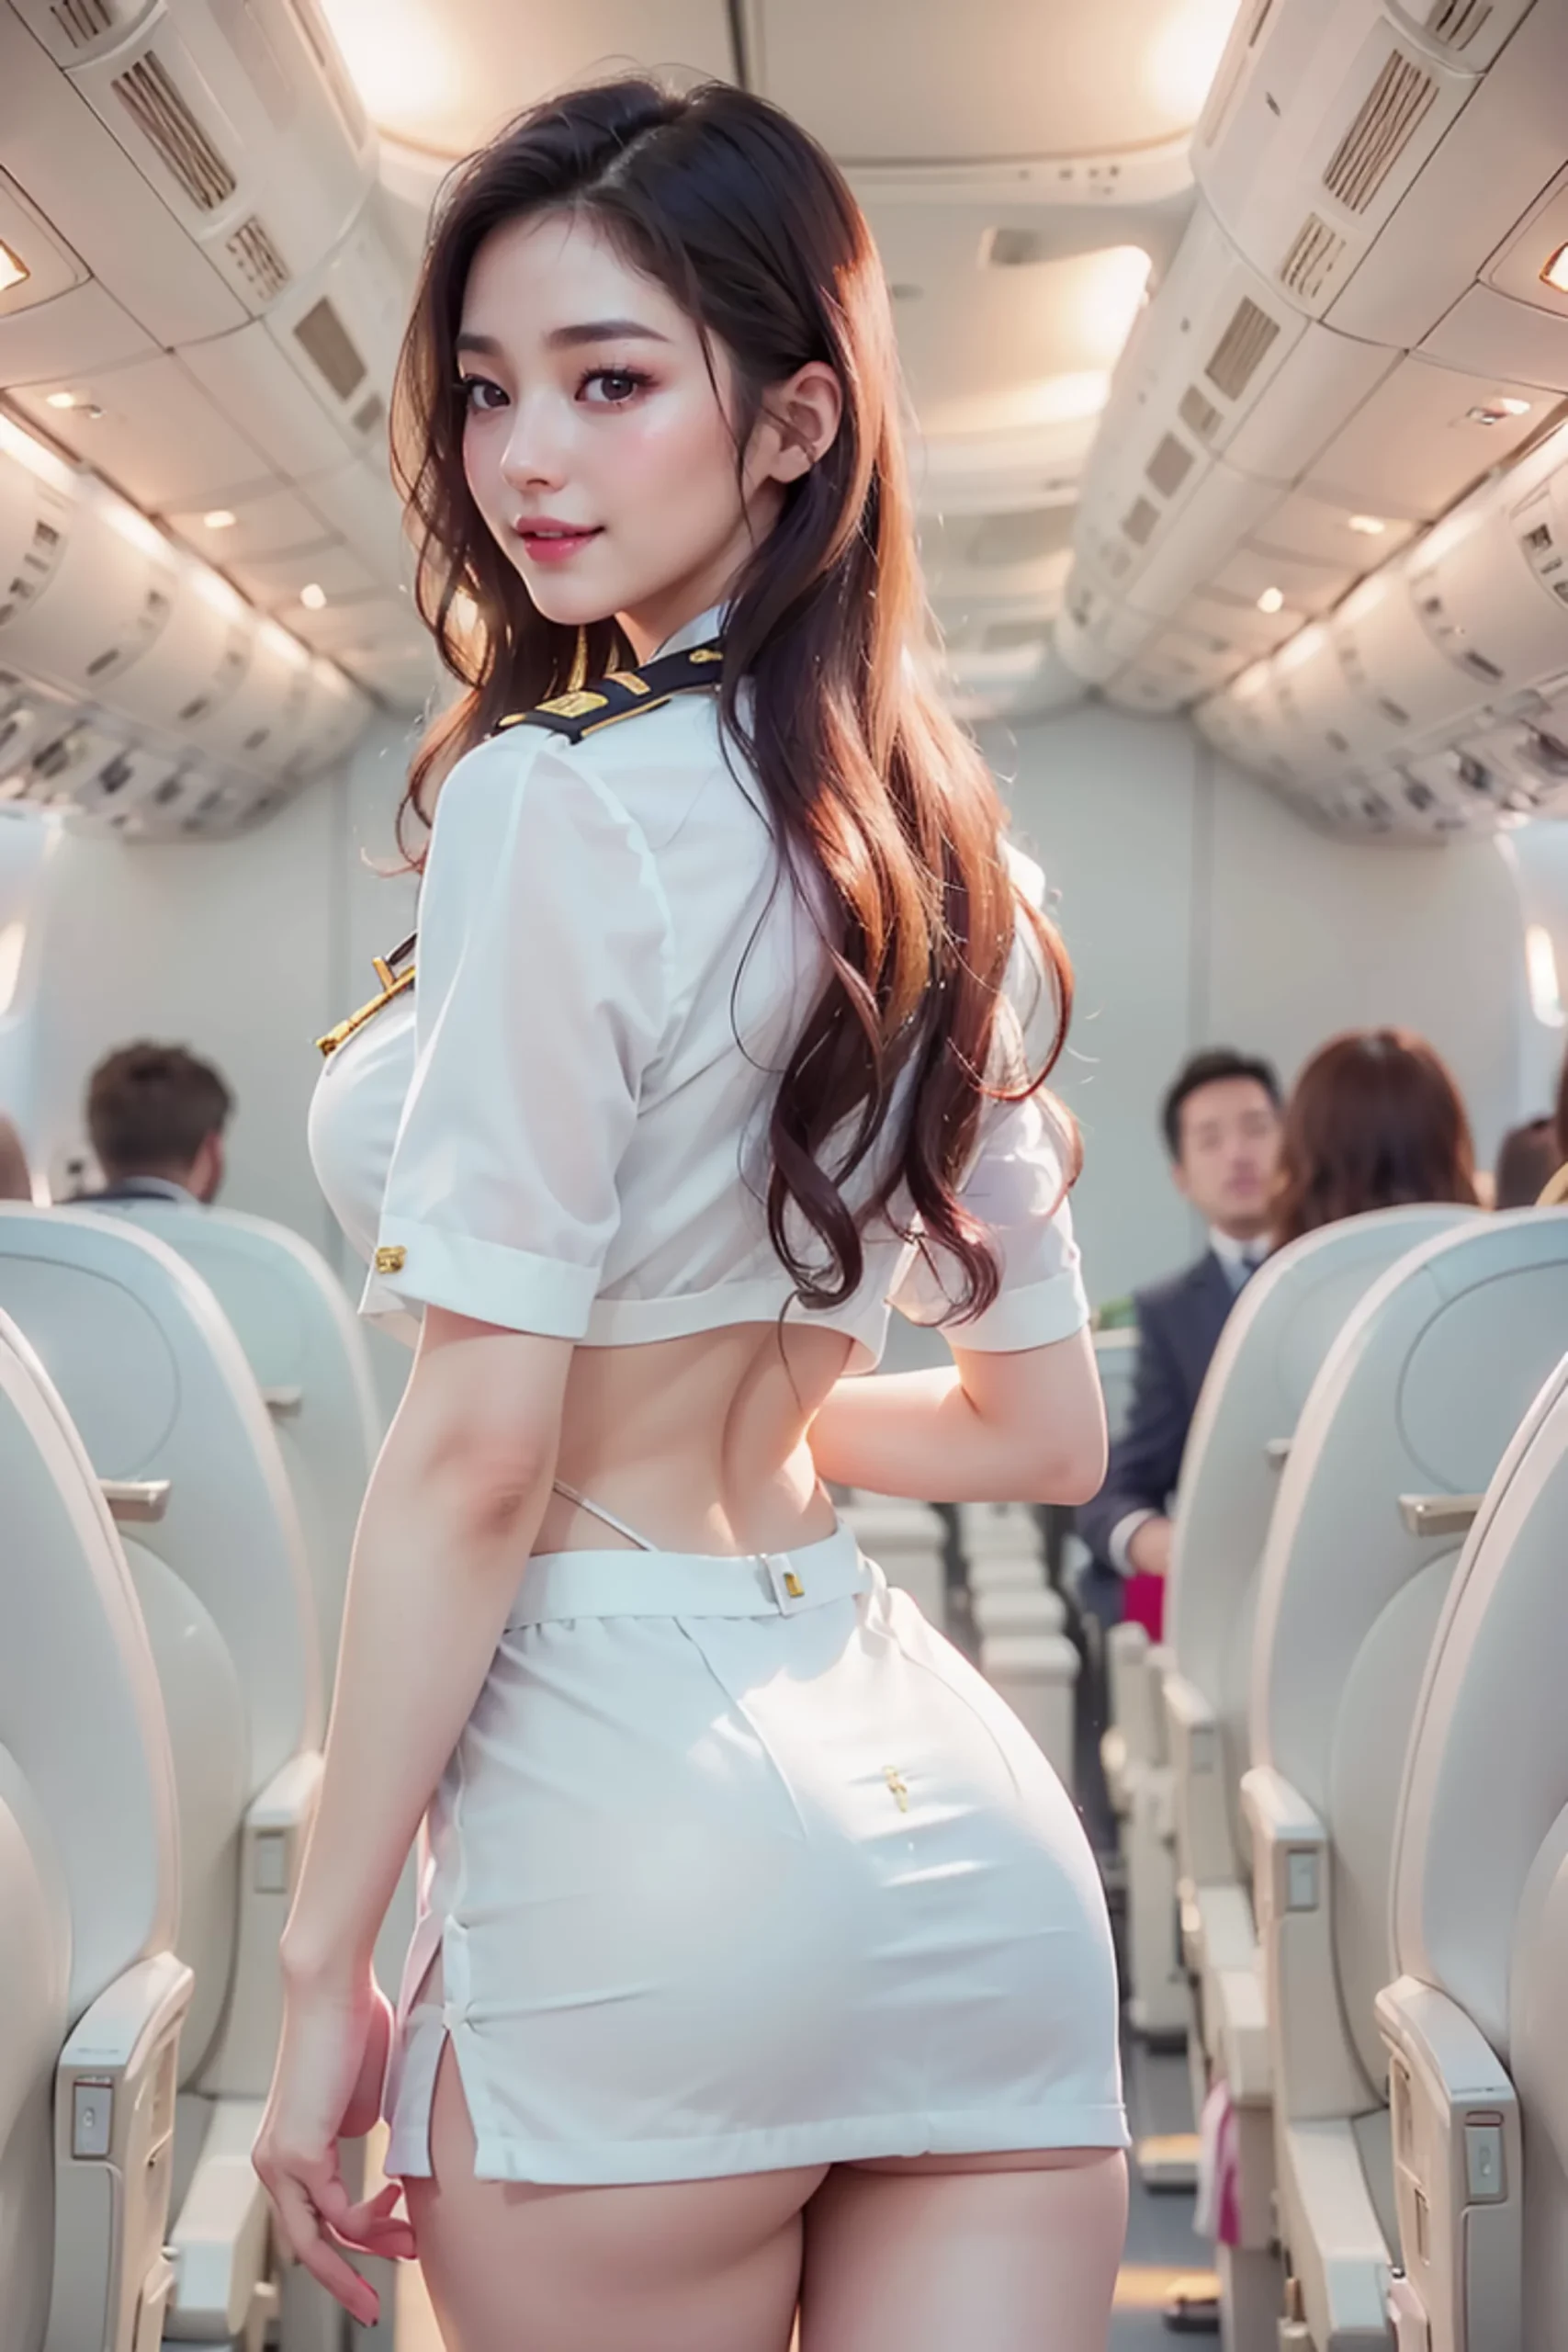 Sexy Flight Attendant Cosplay Vol. 2 Images 27